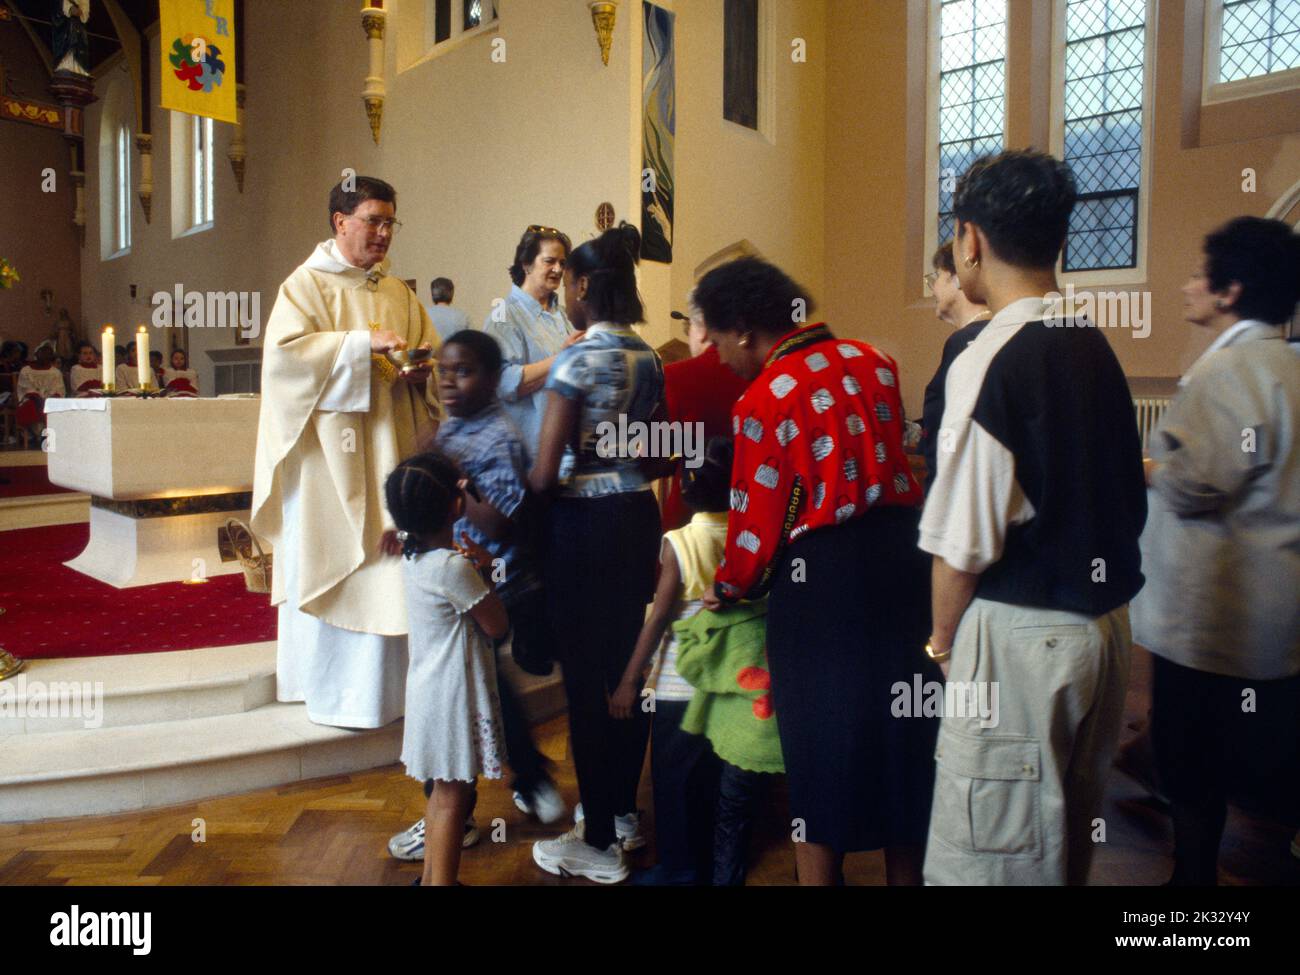 People Queuing for Communion at St Joseph's Church Roehampton London England Stock Photo